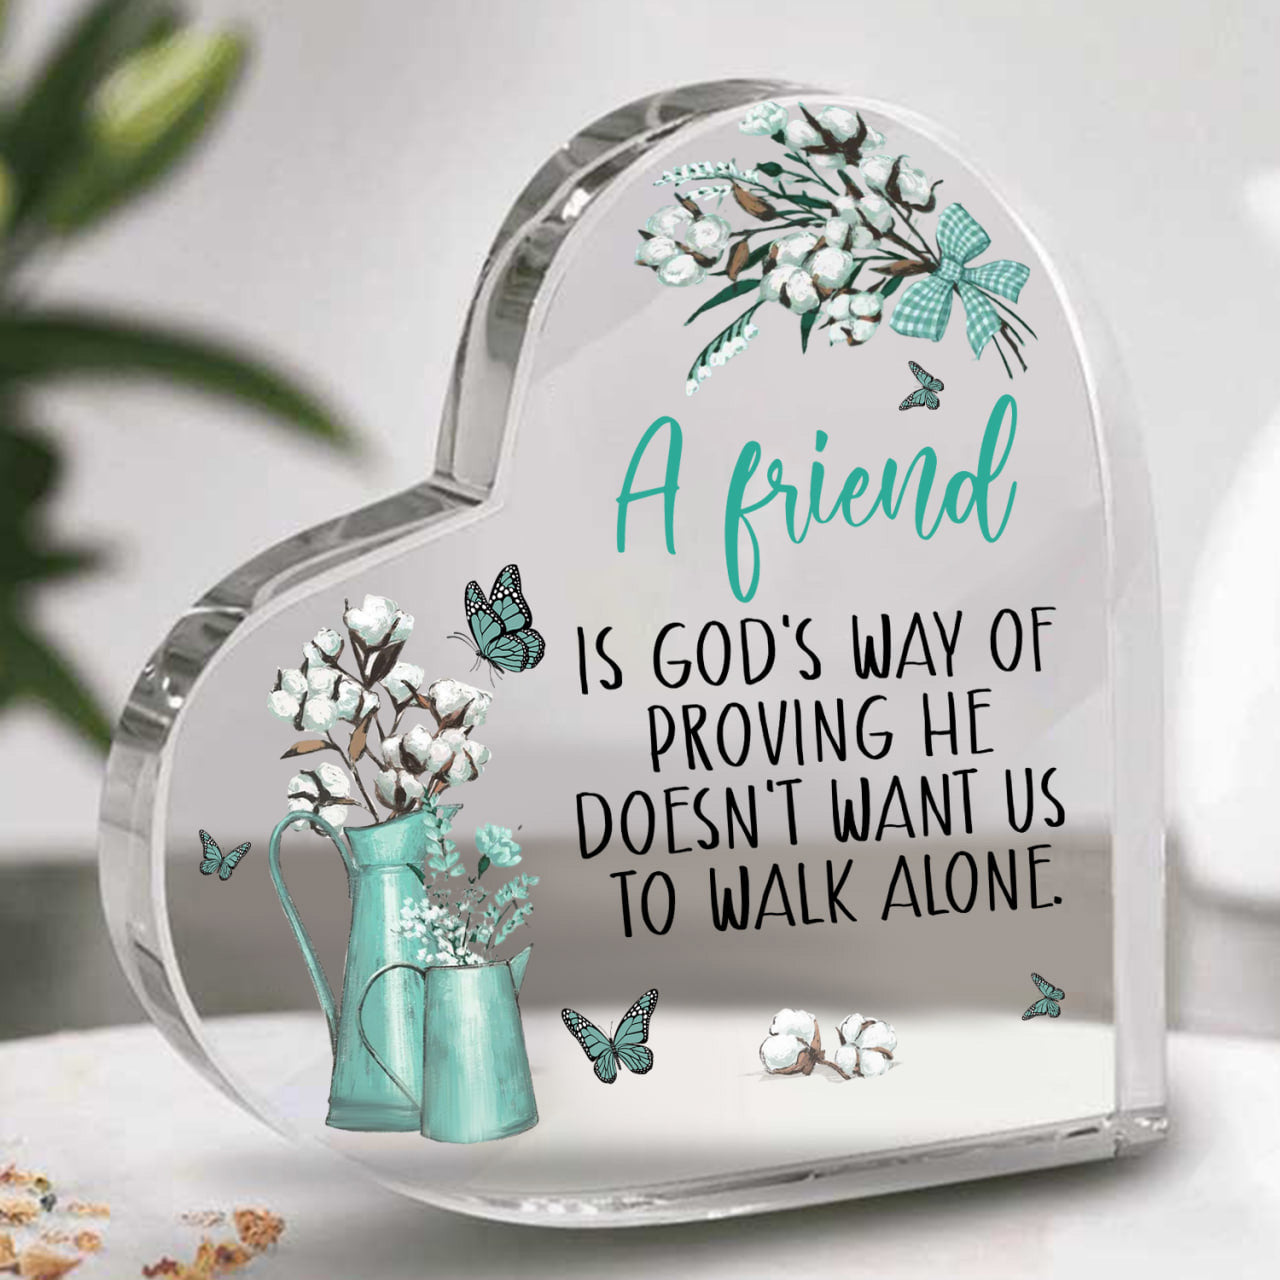 He Doesn’t Want Us to Walk Alone Friendship Gift Acrylic Heart Plaque